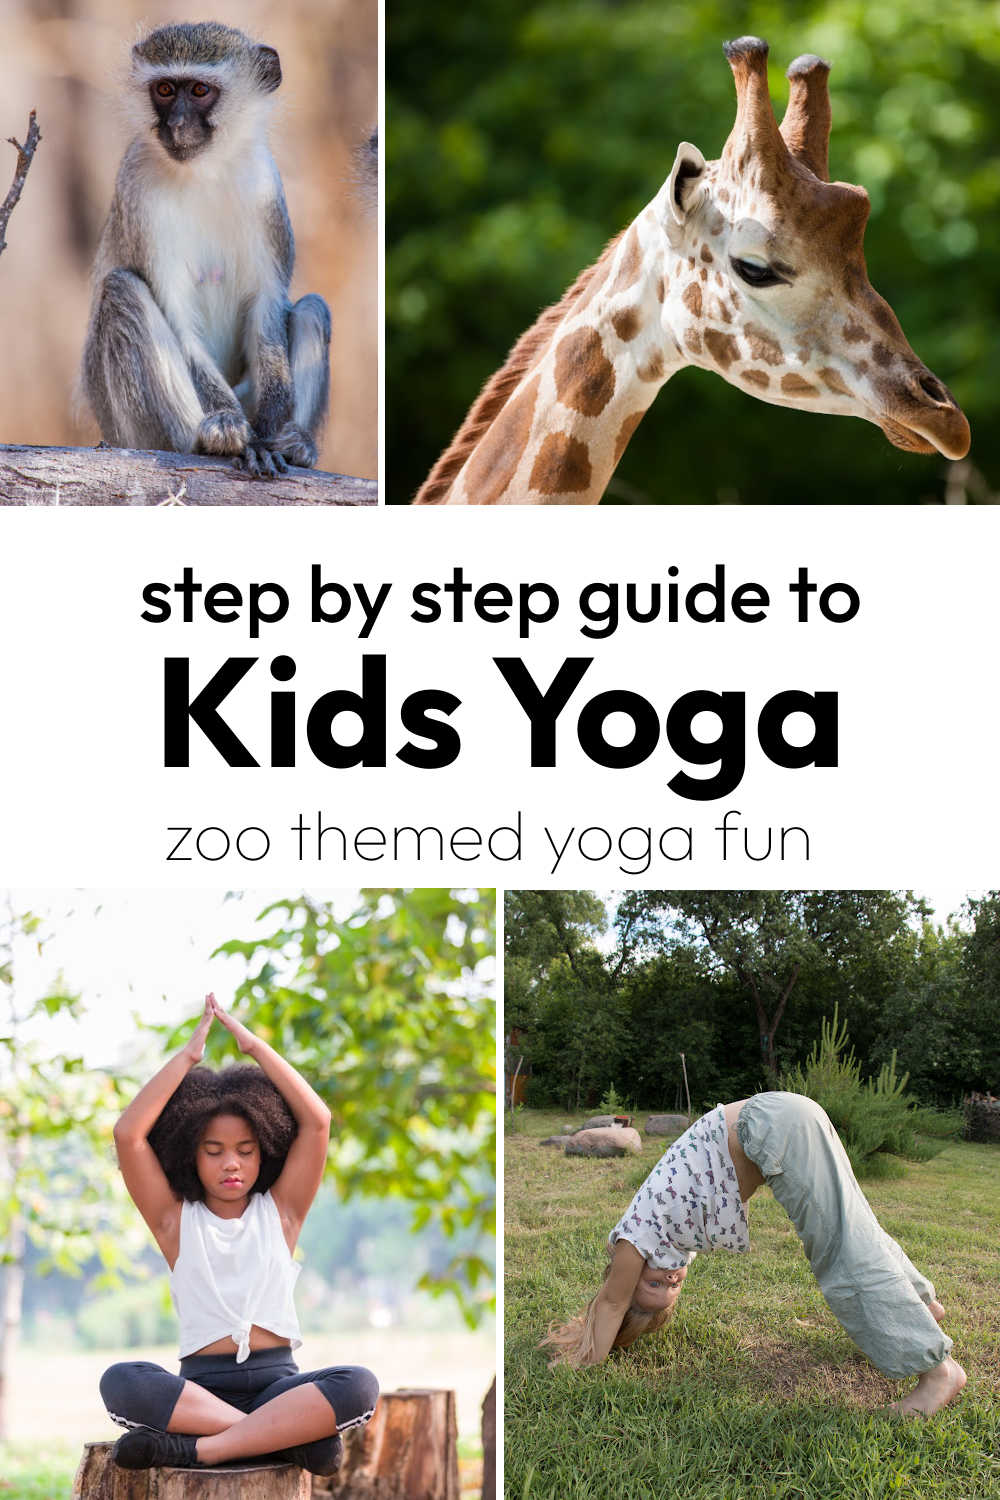 Step by Step Guide to Kids Yoga - Zoo Themed Fun